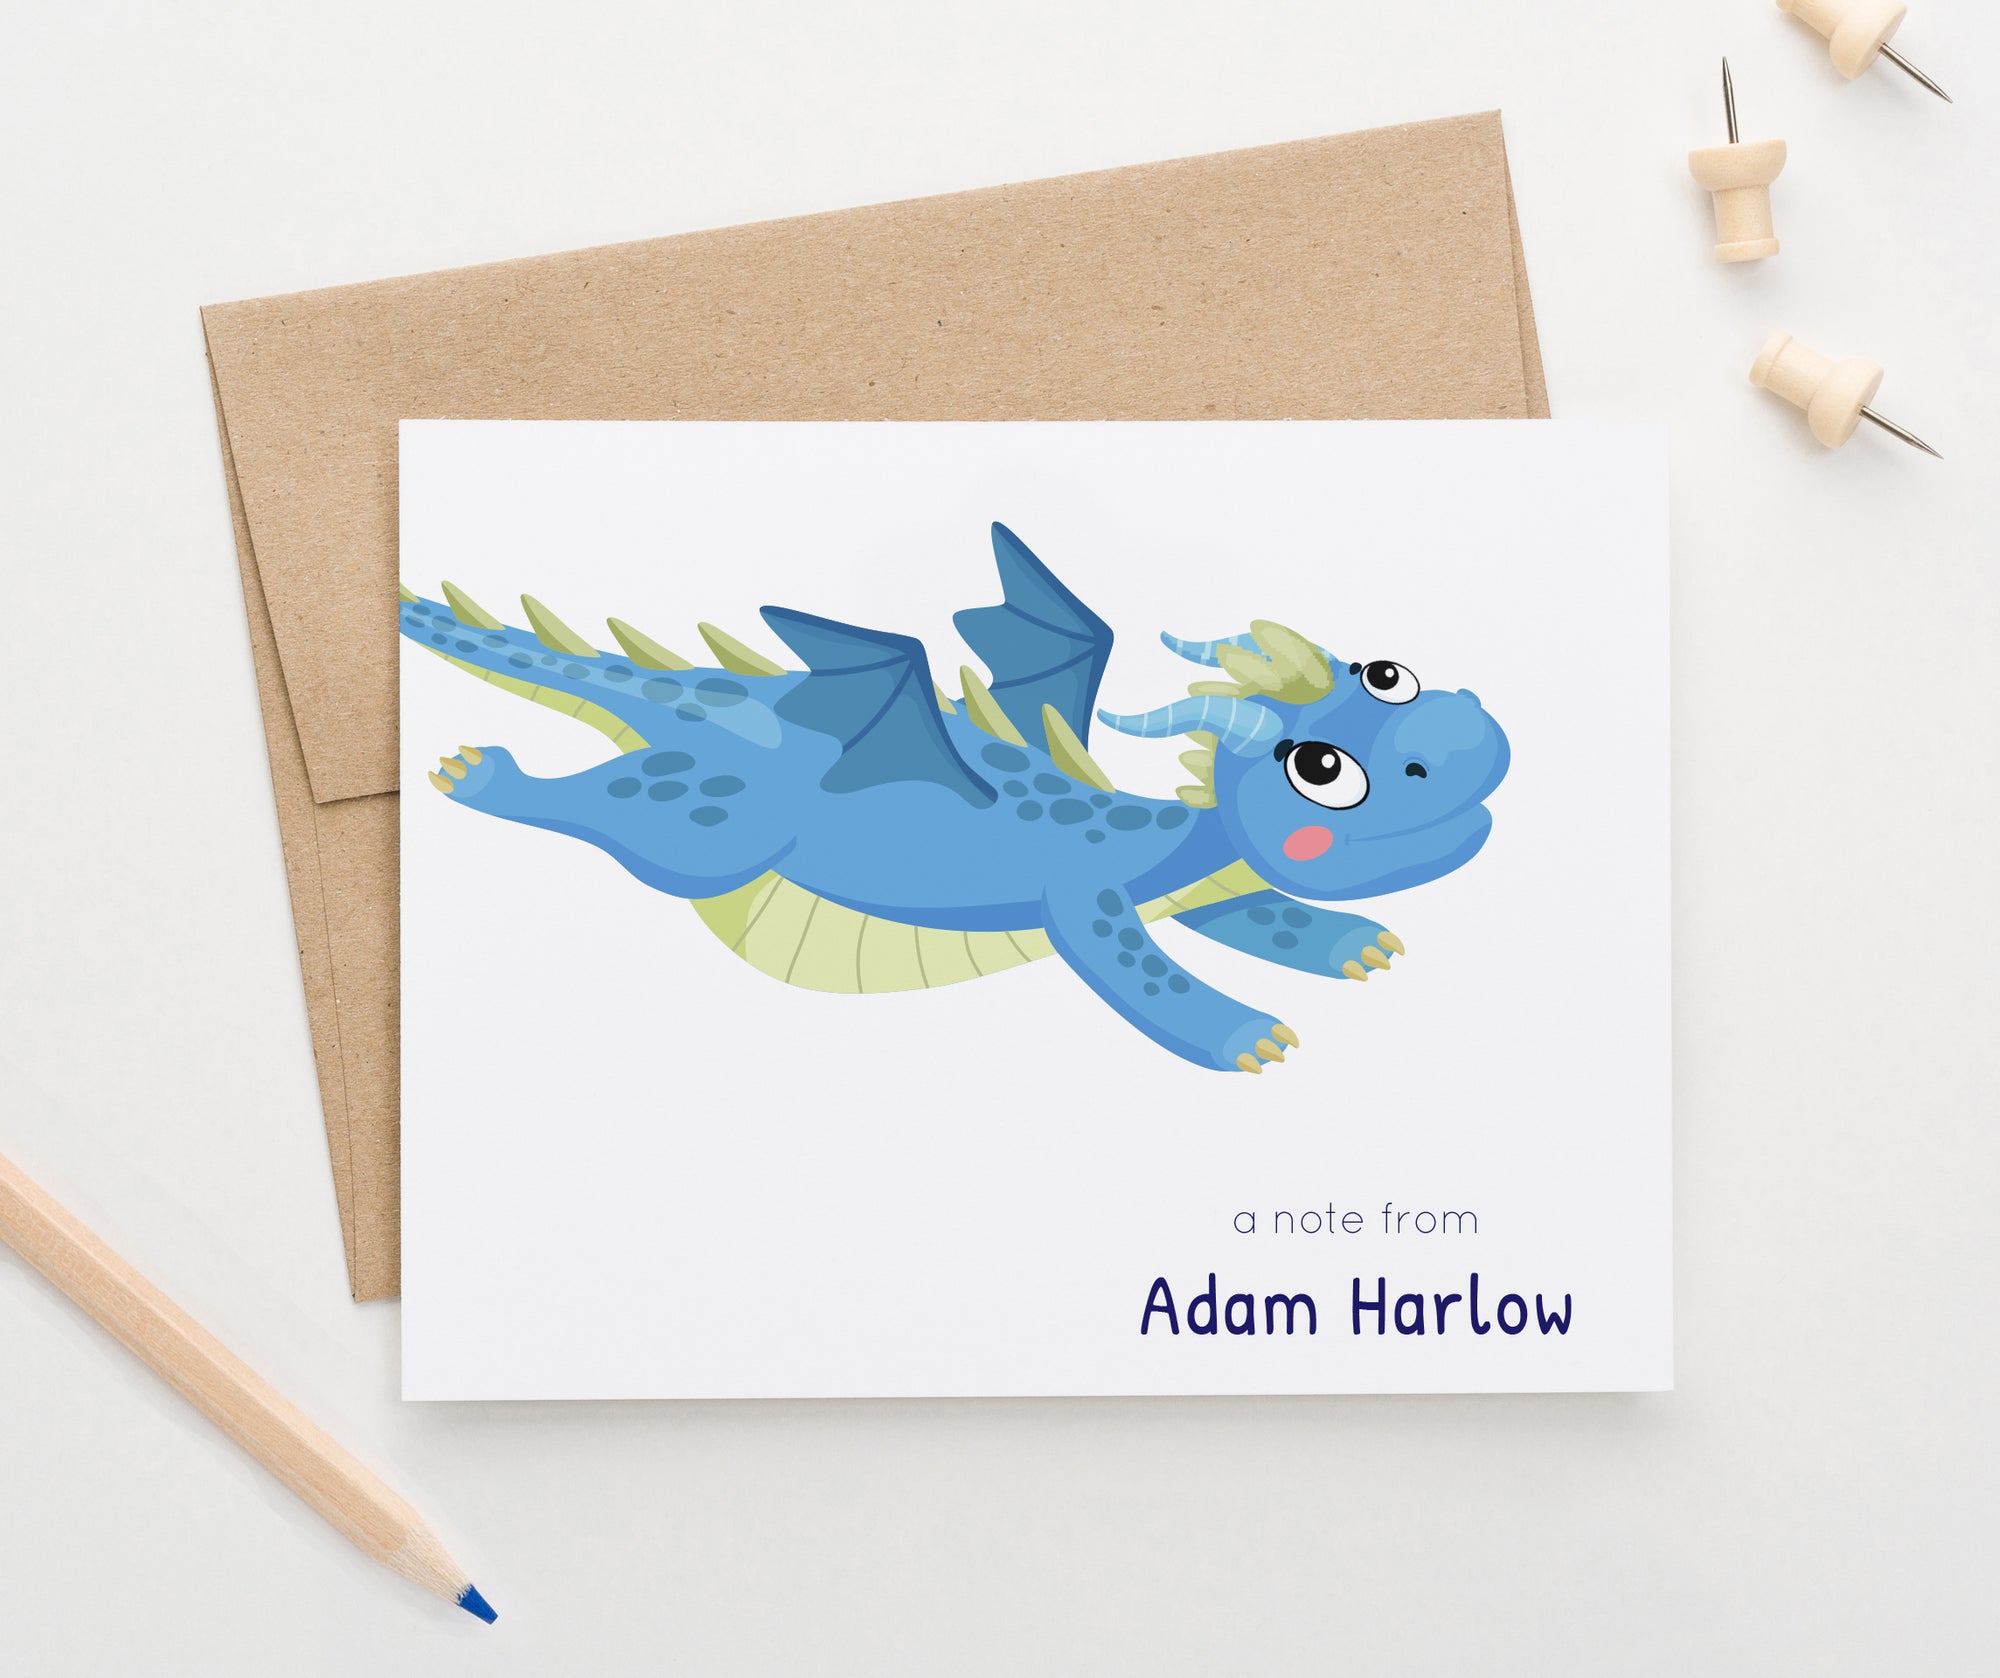 KS211 Personalized Folded Stationary Cards with Flying Dragon dragons kids boy girl notes